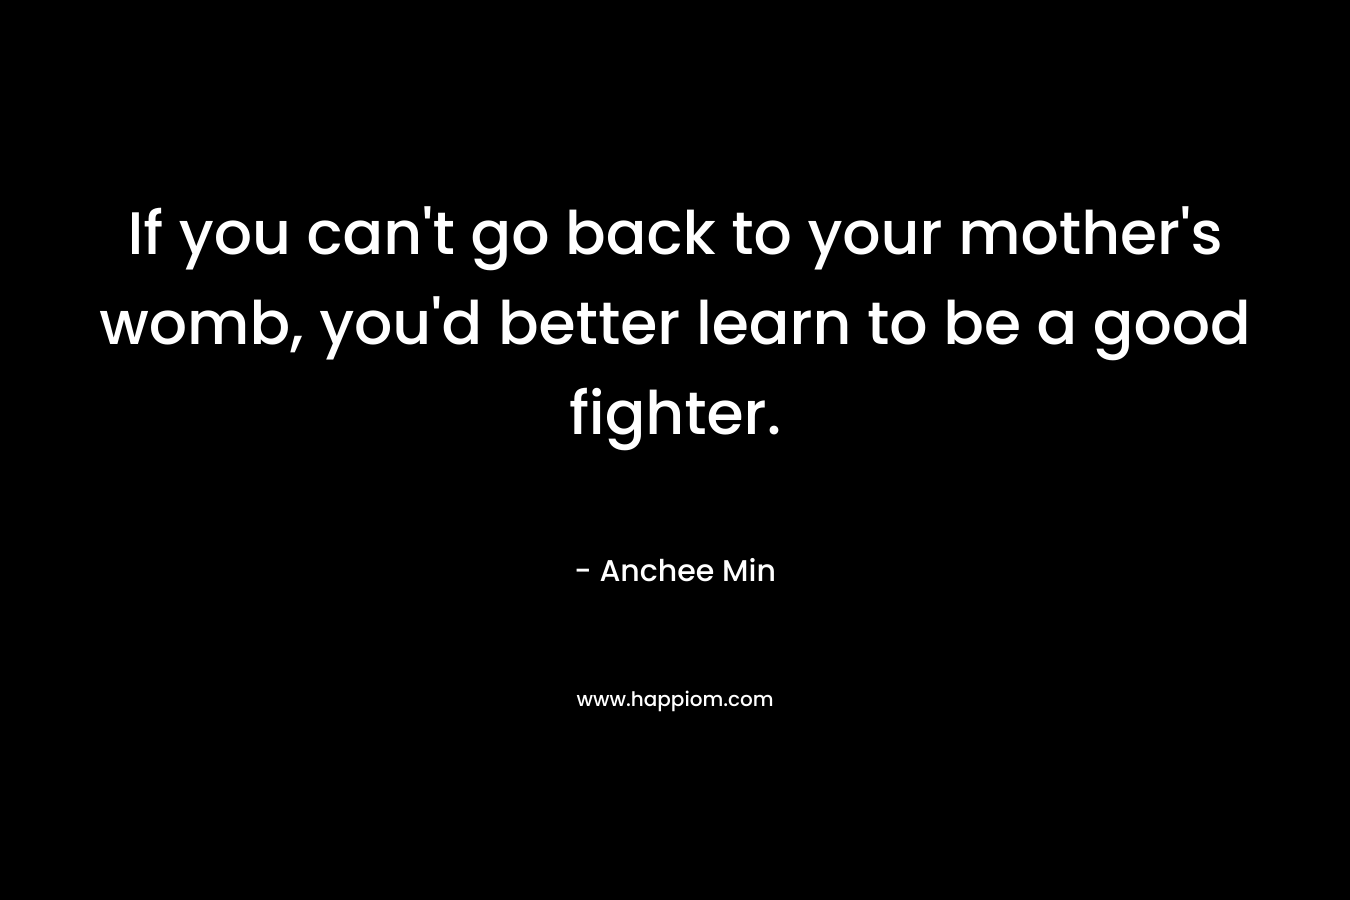 If you can’t go back to your mother’s womb, you’d better learn to be a good fighter. – Anchee Min